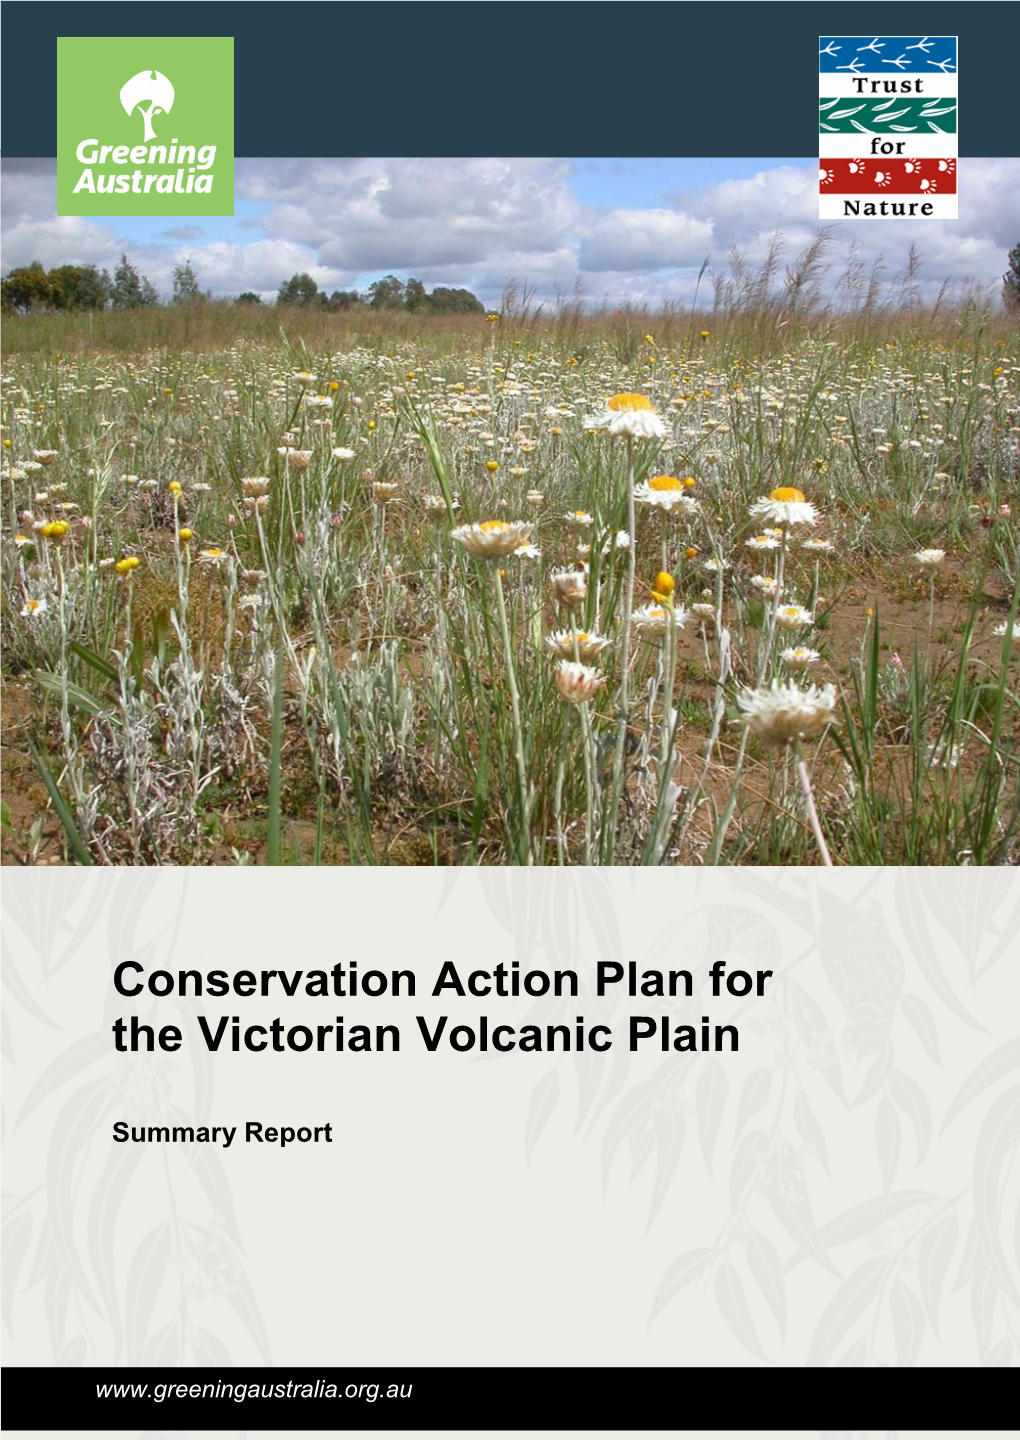 Conservation Action Plan for the Victorian Volcanic Plain